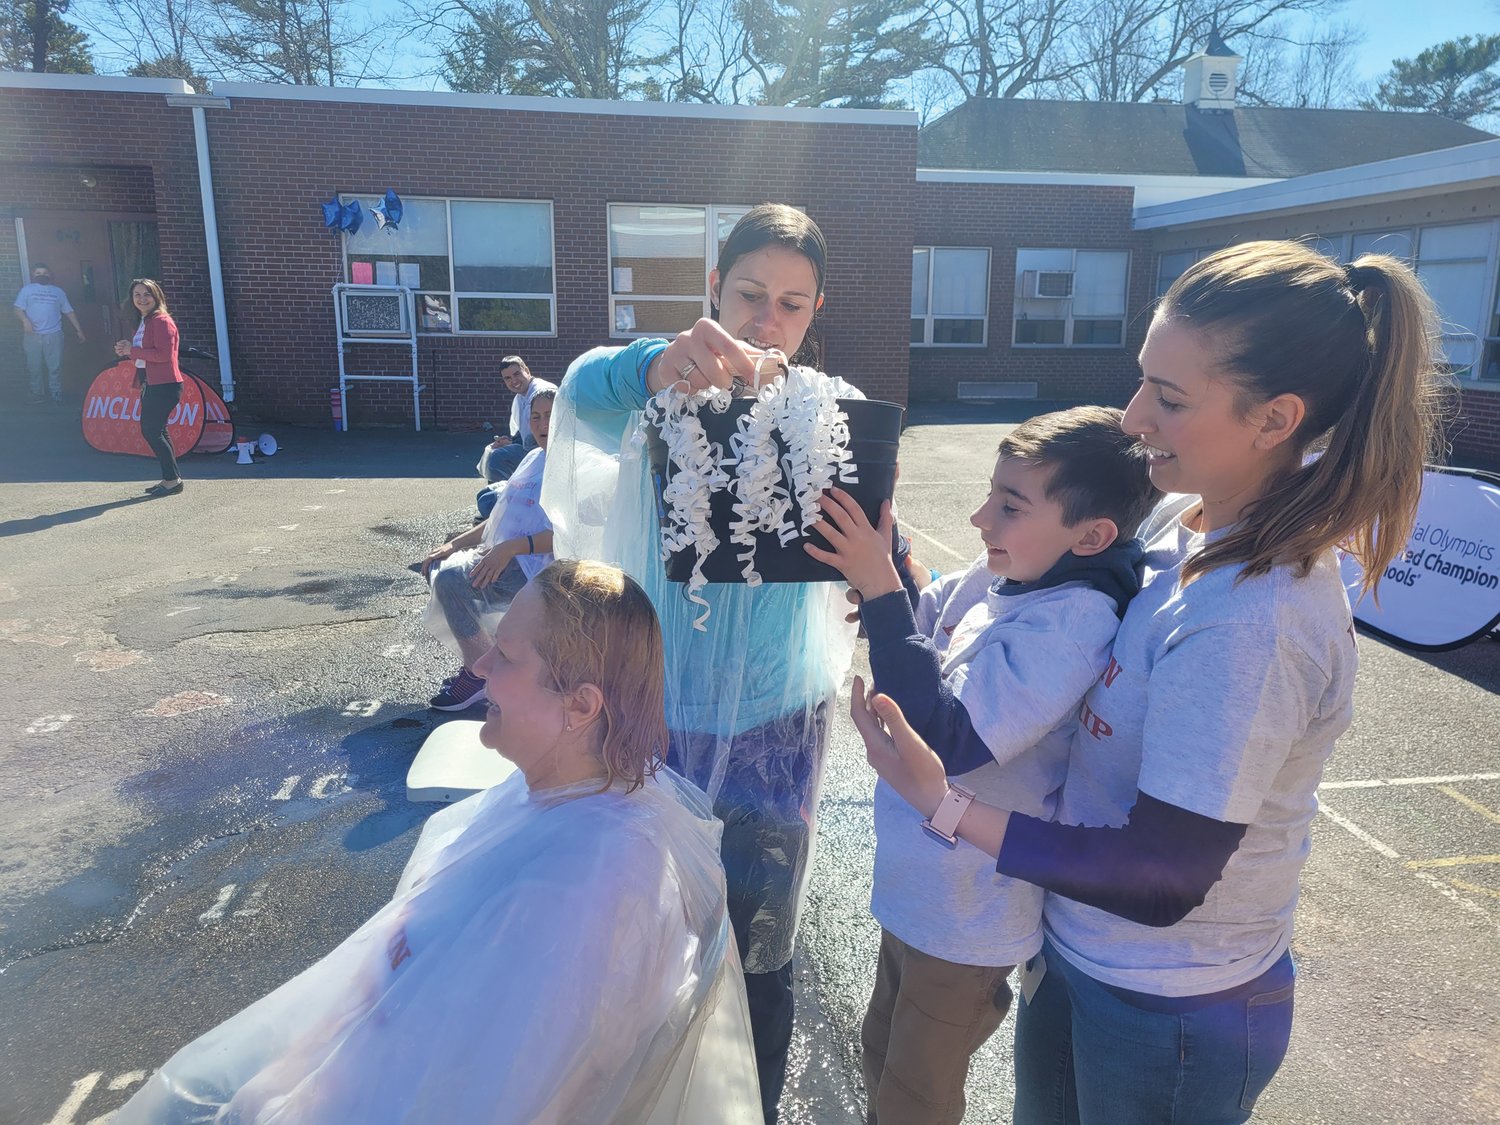 THE WINNER: Third-grader Elliot Sarli, with the assistance of PE/Health teacher Amanda Sloan and teacher Bryana Ruisi, pour water over Principal Helina Dlugon. Sarli raised more than $1,200 on his own; more than any other student.